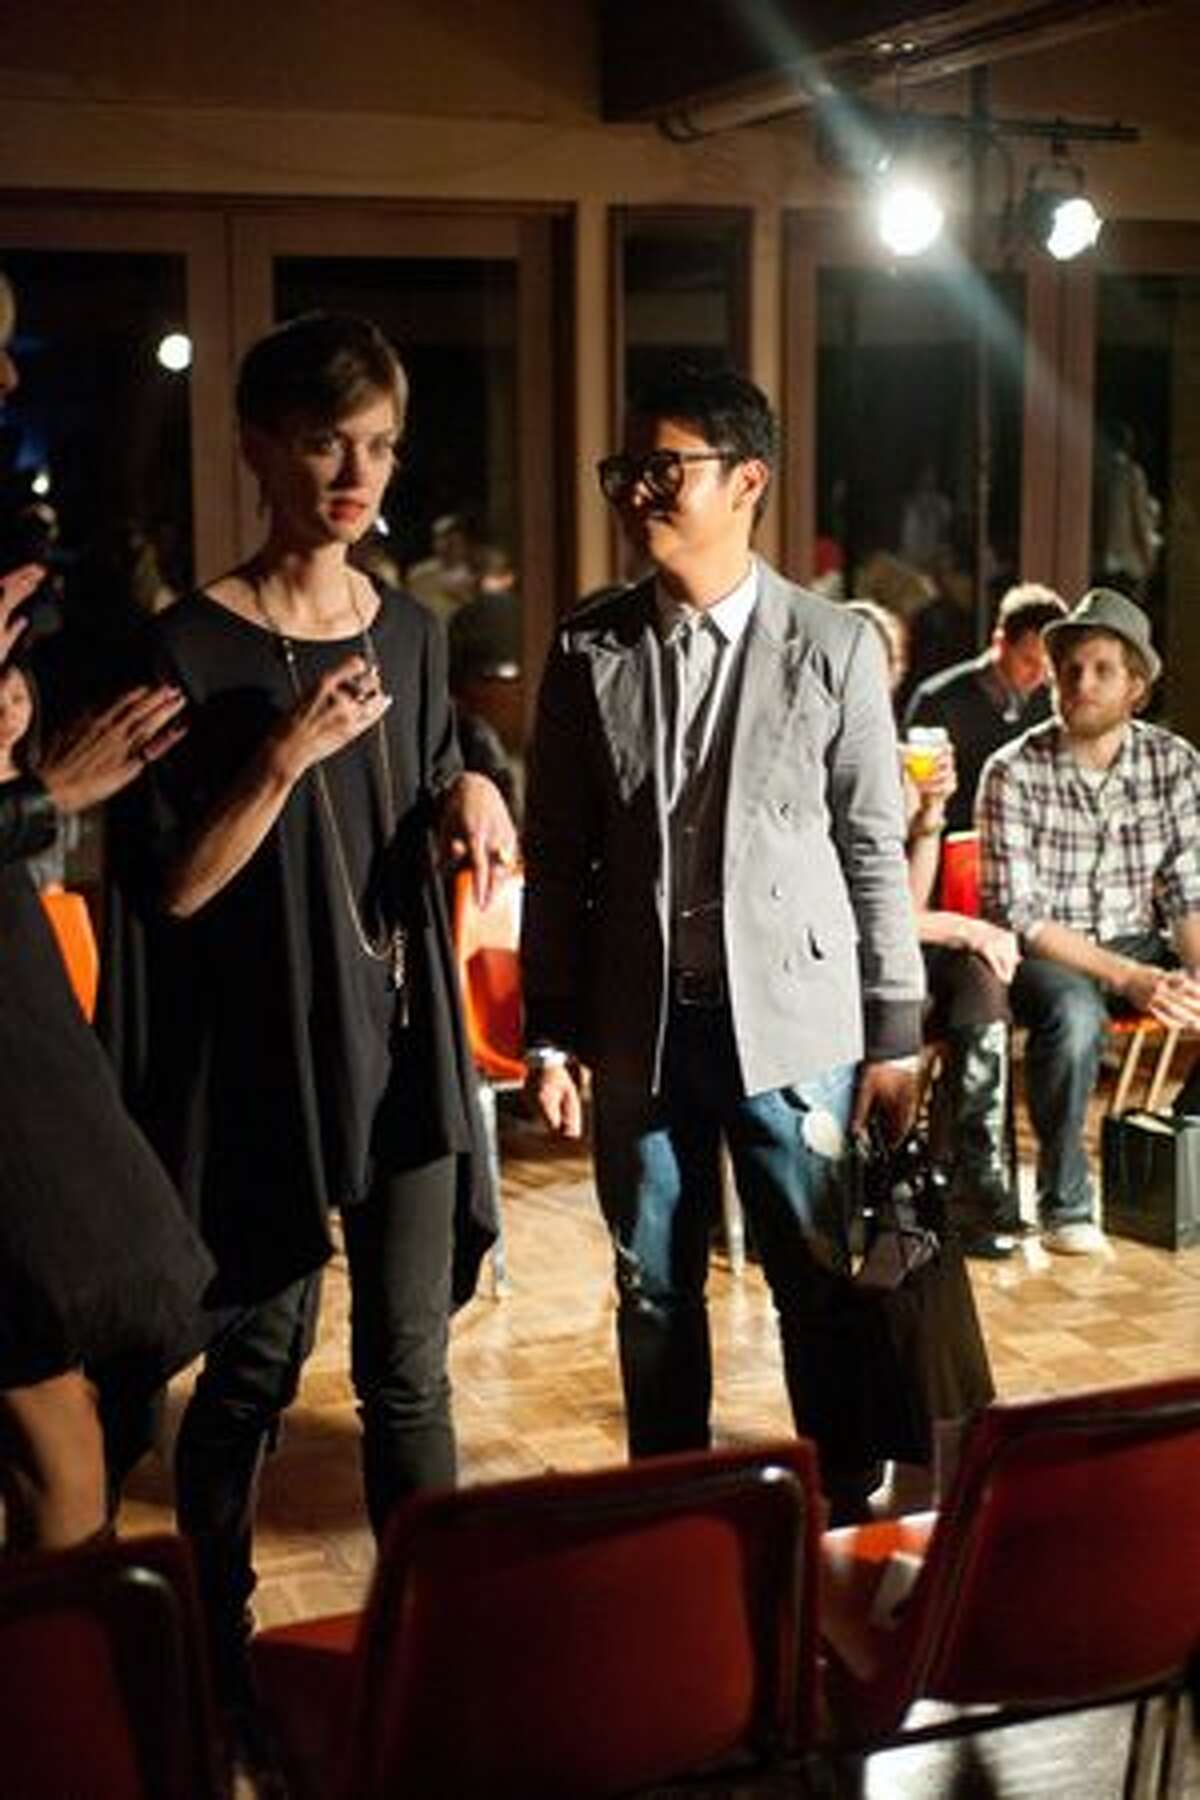 Guests at Blackbird's Autumn/Winter Runway Presentation talk and laugh as they wait for the show to begin.